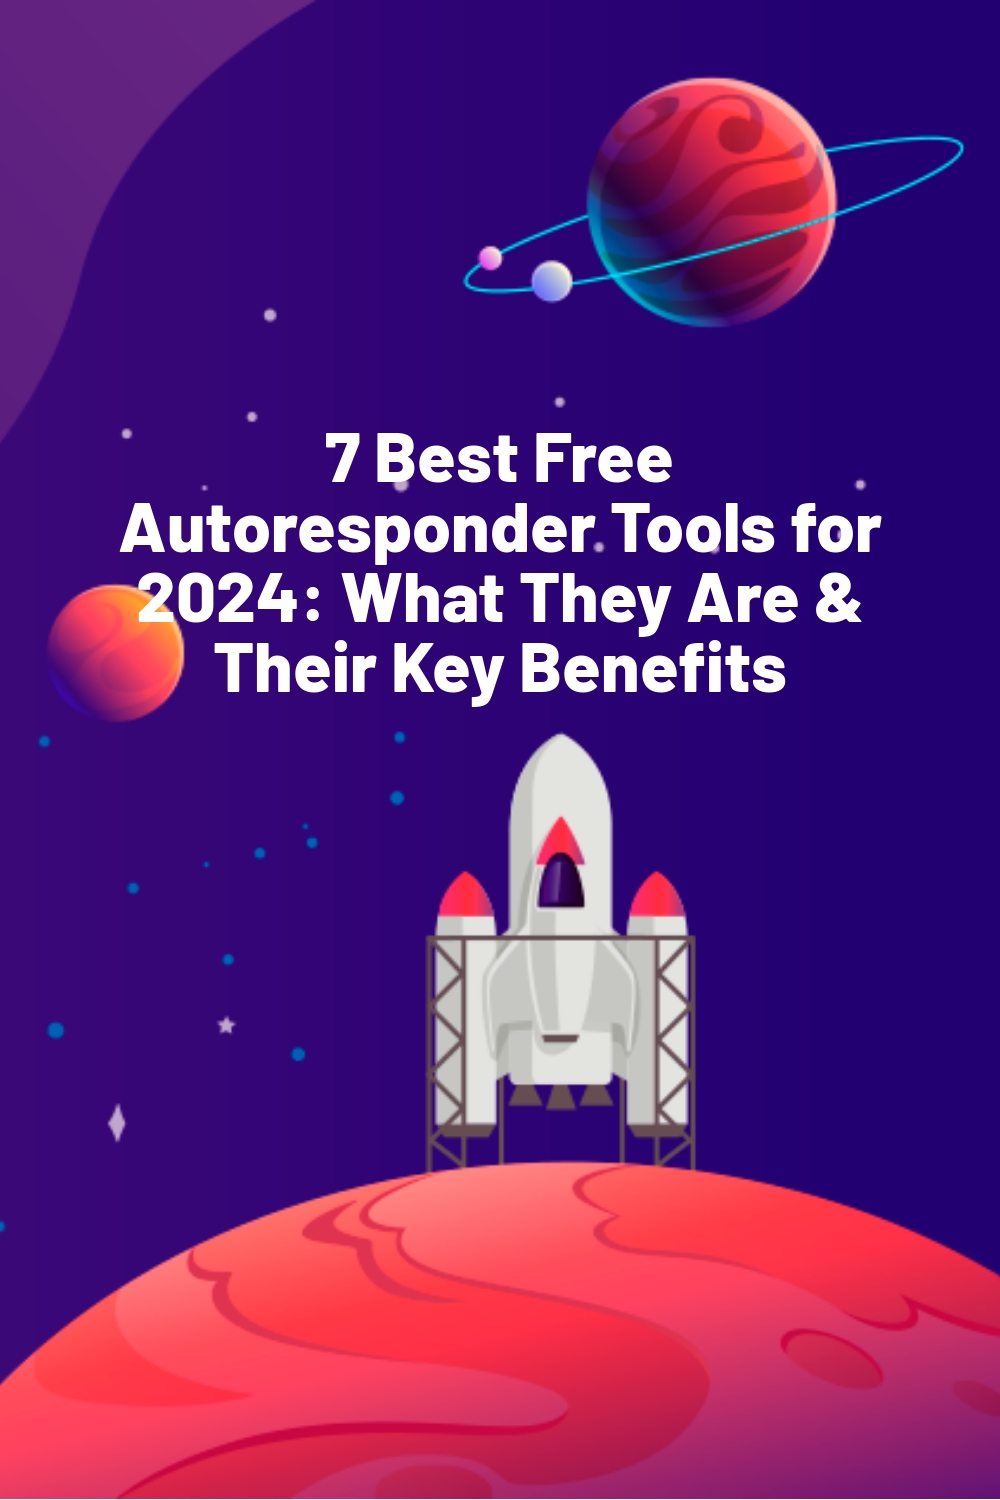 7 Best Free Autoresponder Tools for 2024: What They Are & Their Key Benefits